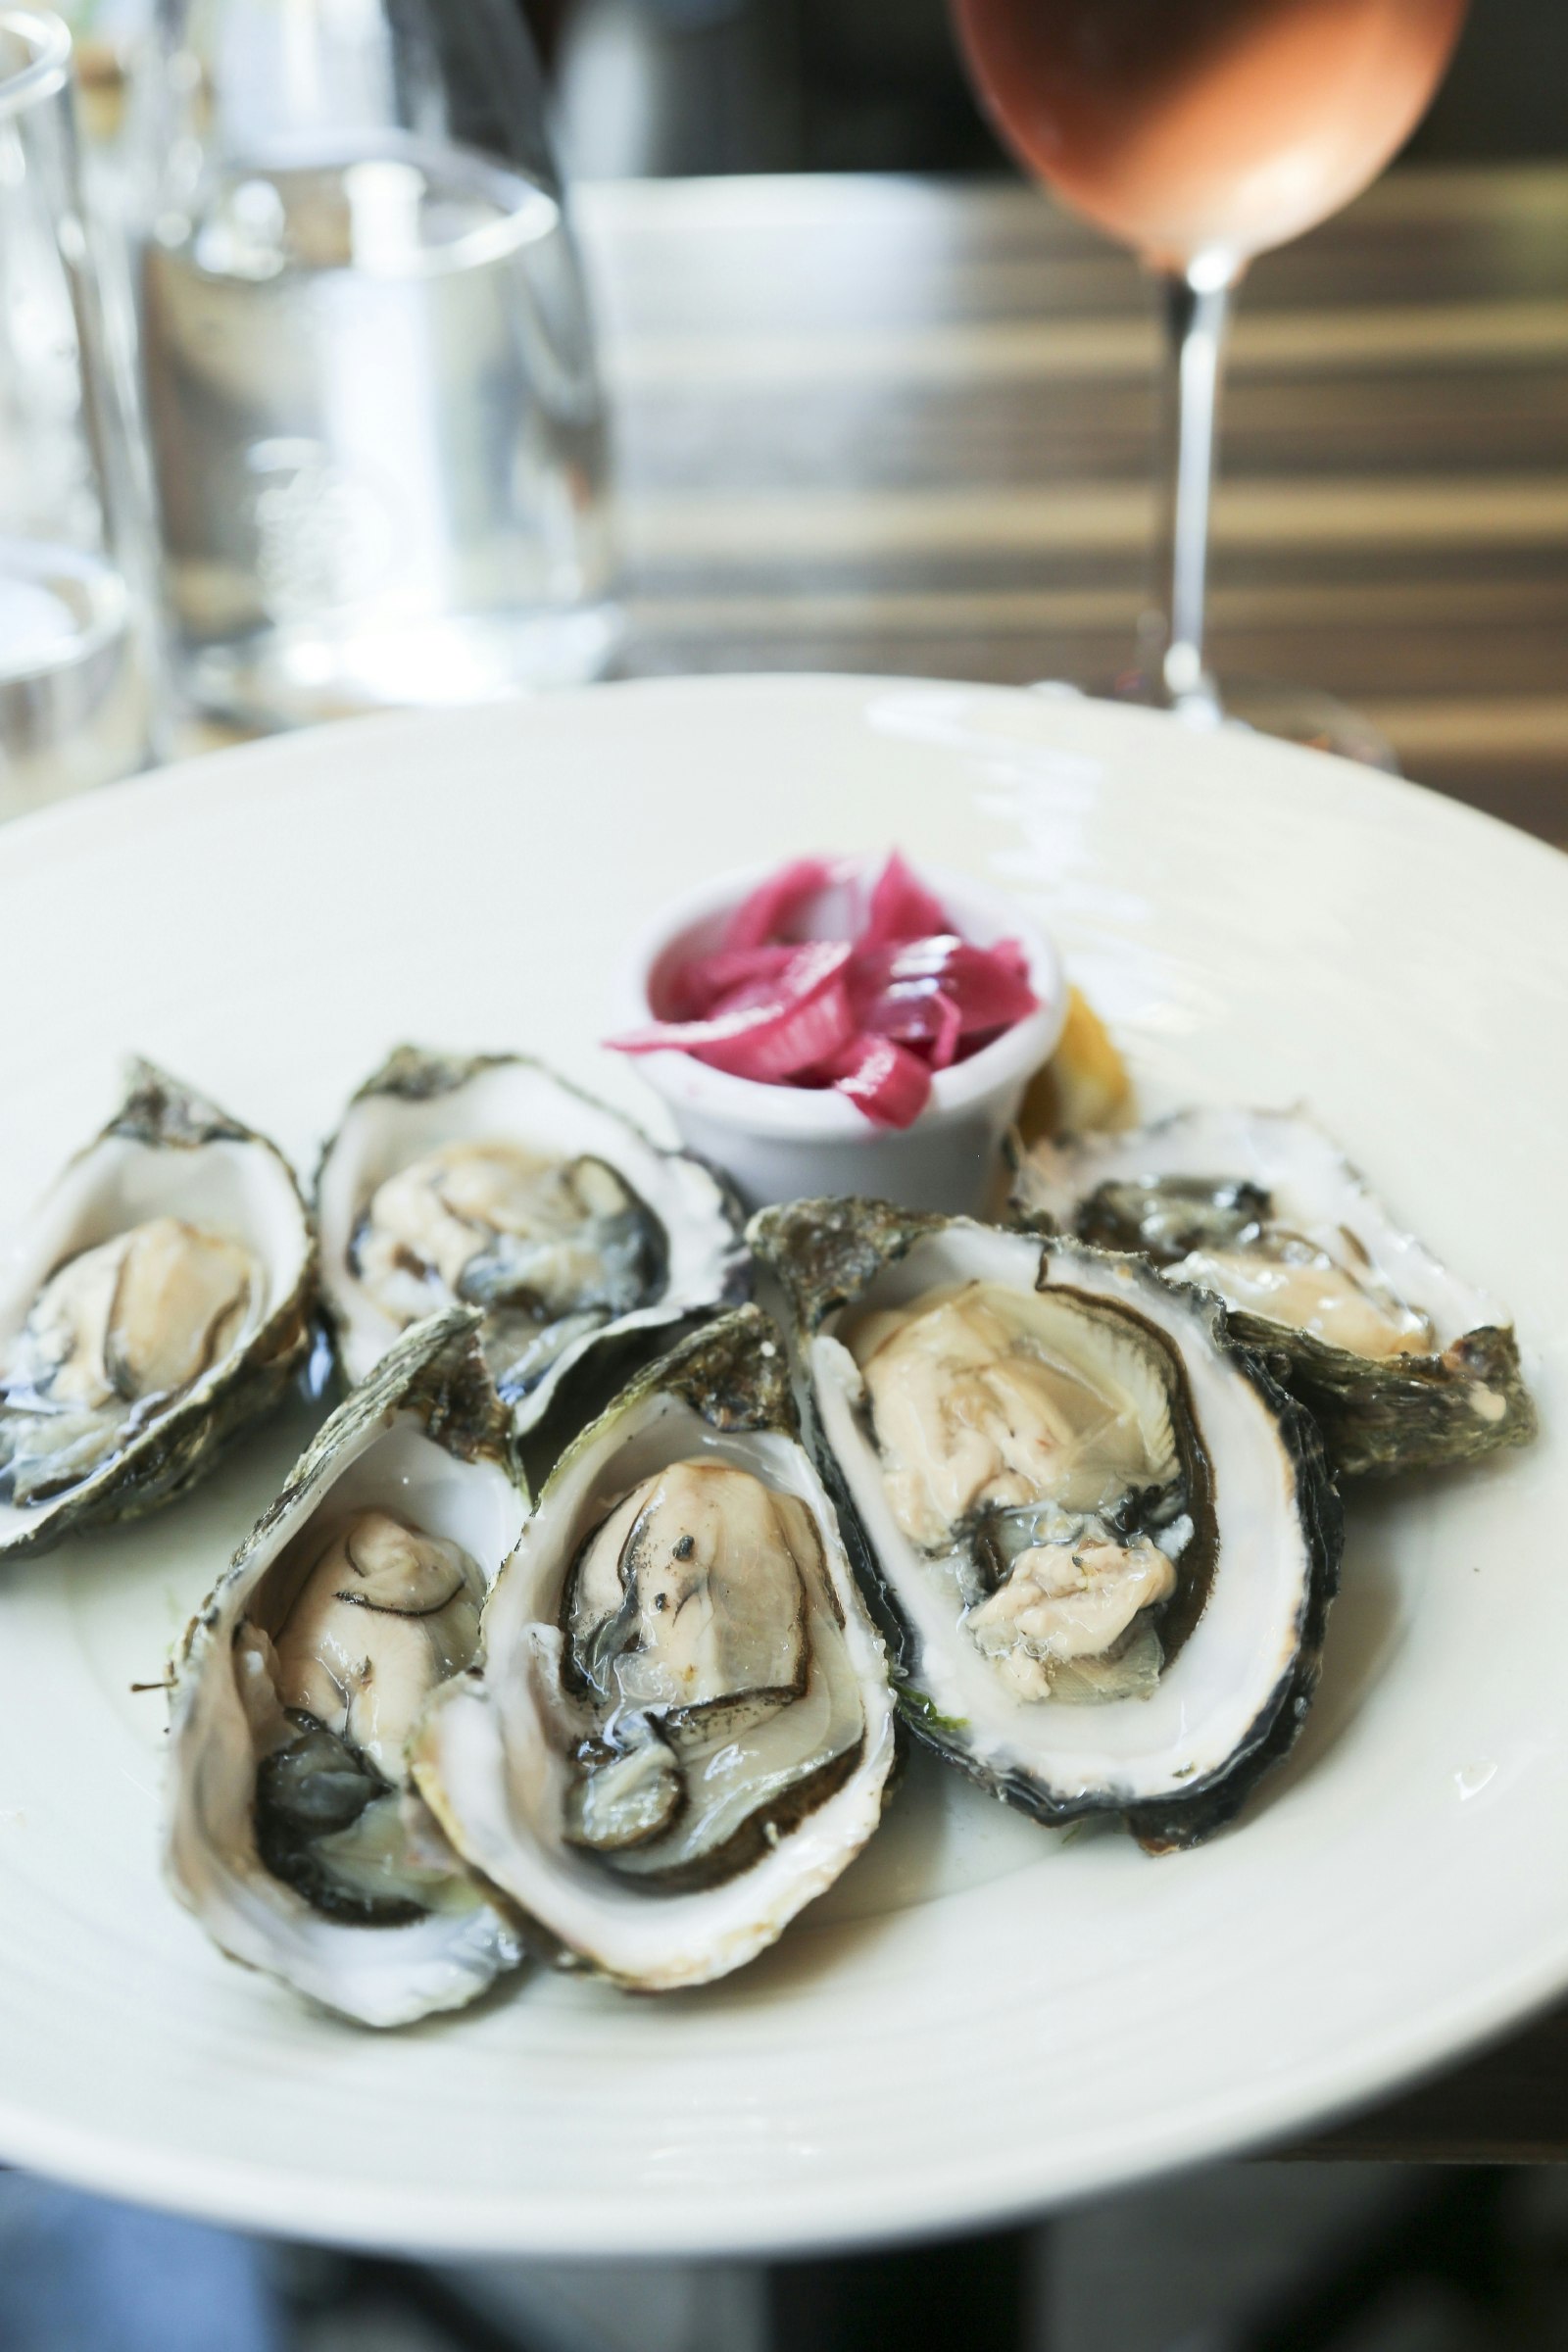 A plate of oysters with a chilled glass of rose in the background